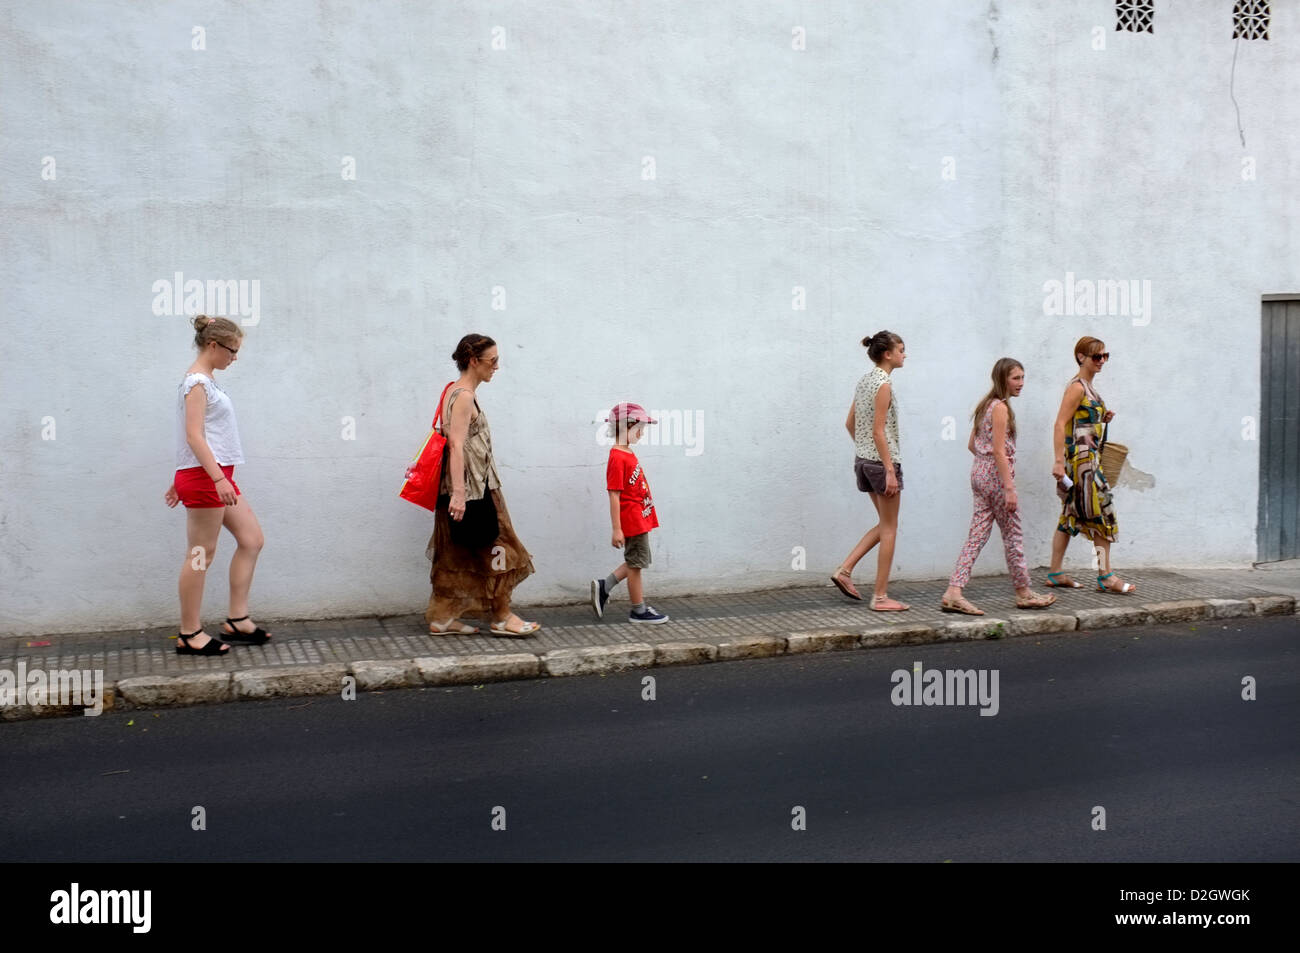 Two mothers on holiday in Spain with their 4 children. Stock Photo